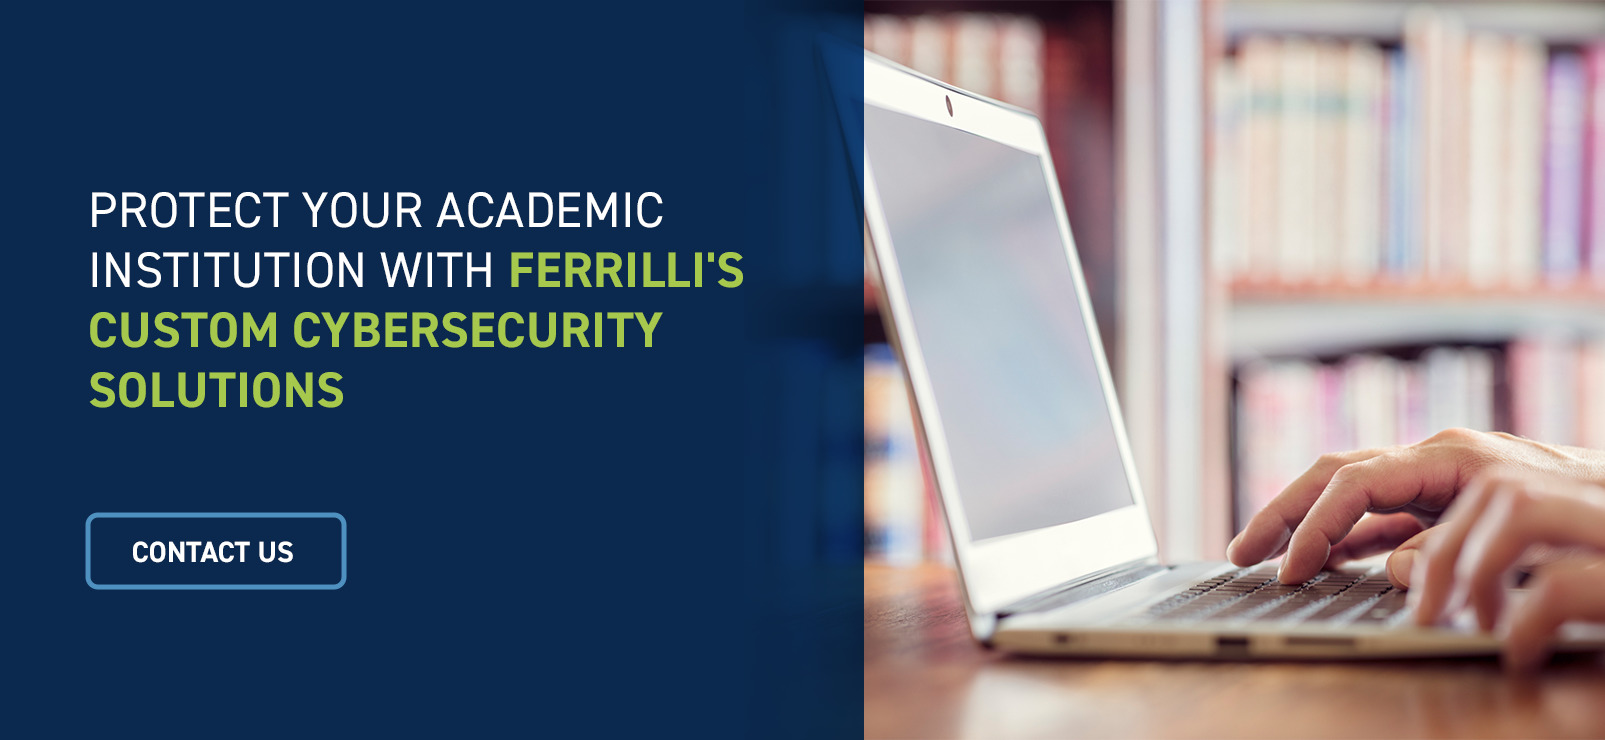 Protect Your Academic Institution With Ferrilli's Custom Cybersecurity Solutions